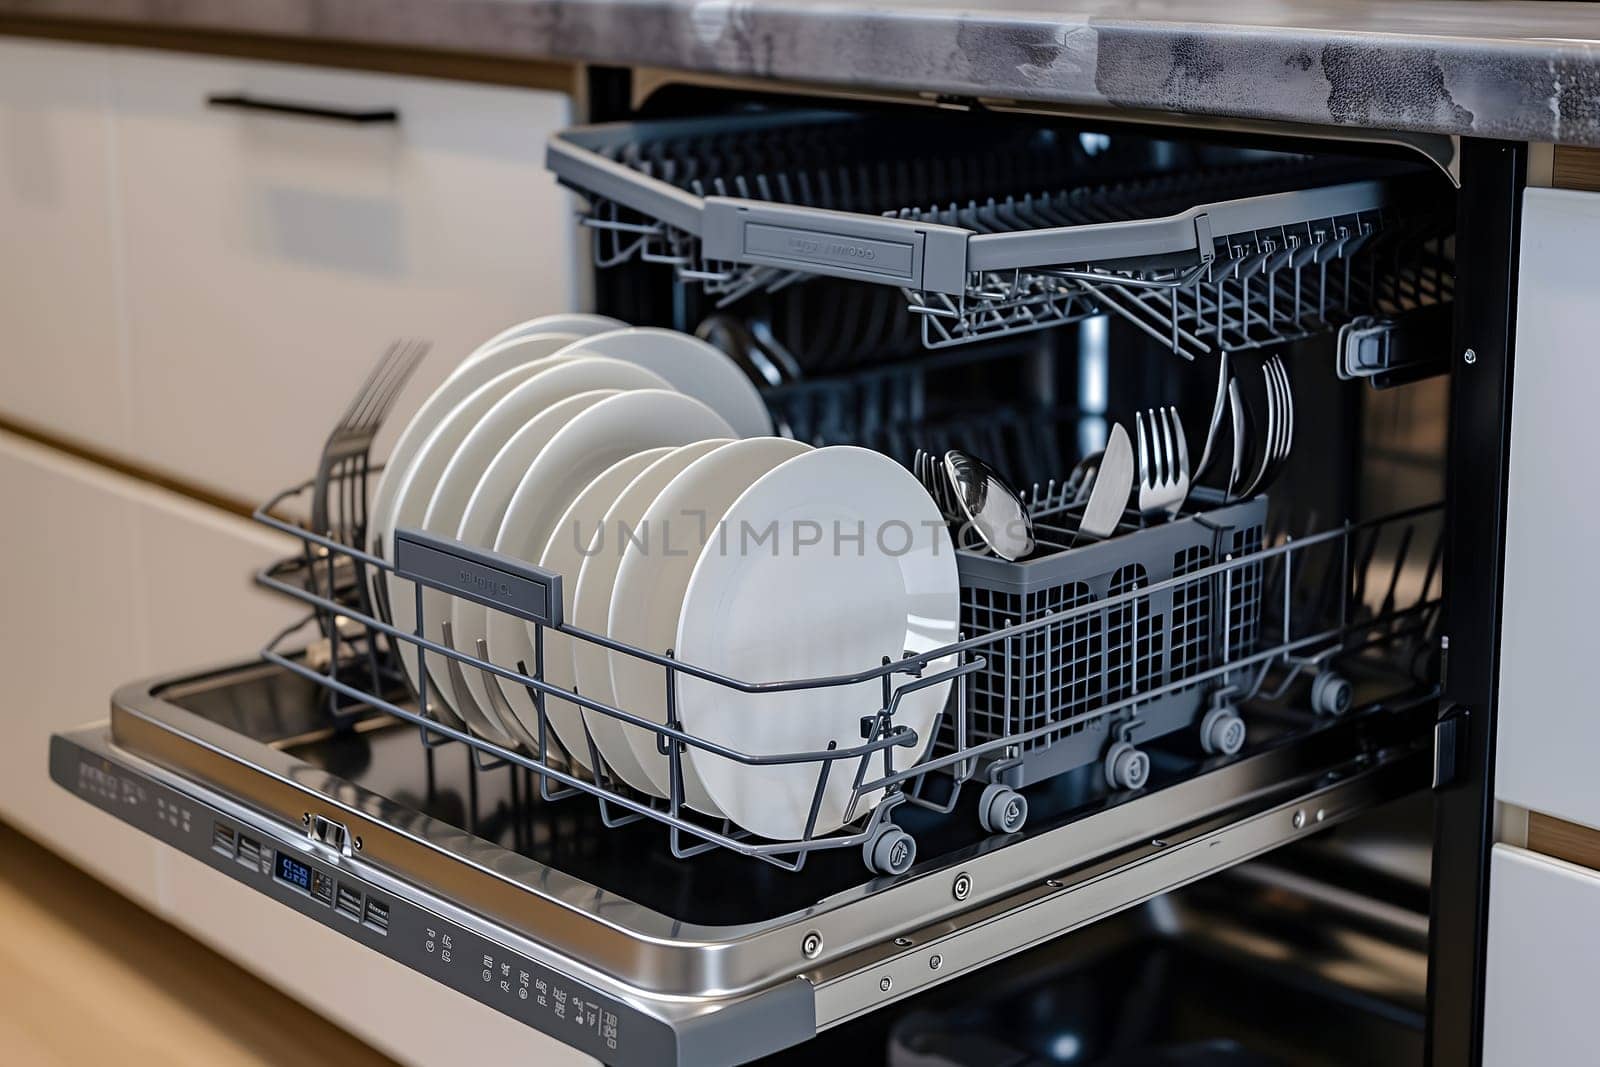 A dishwasher with many plates and silverware in it. Neural network generated image. Not based on any actual scene or pattern.